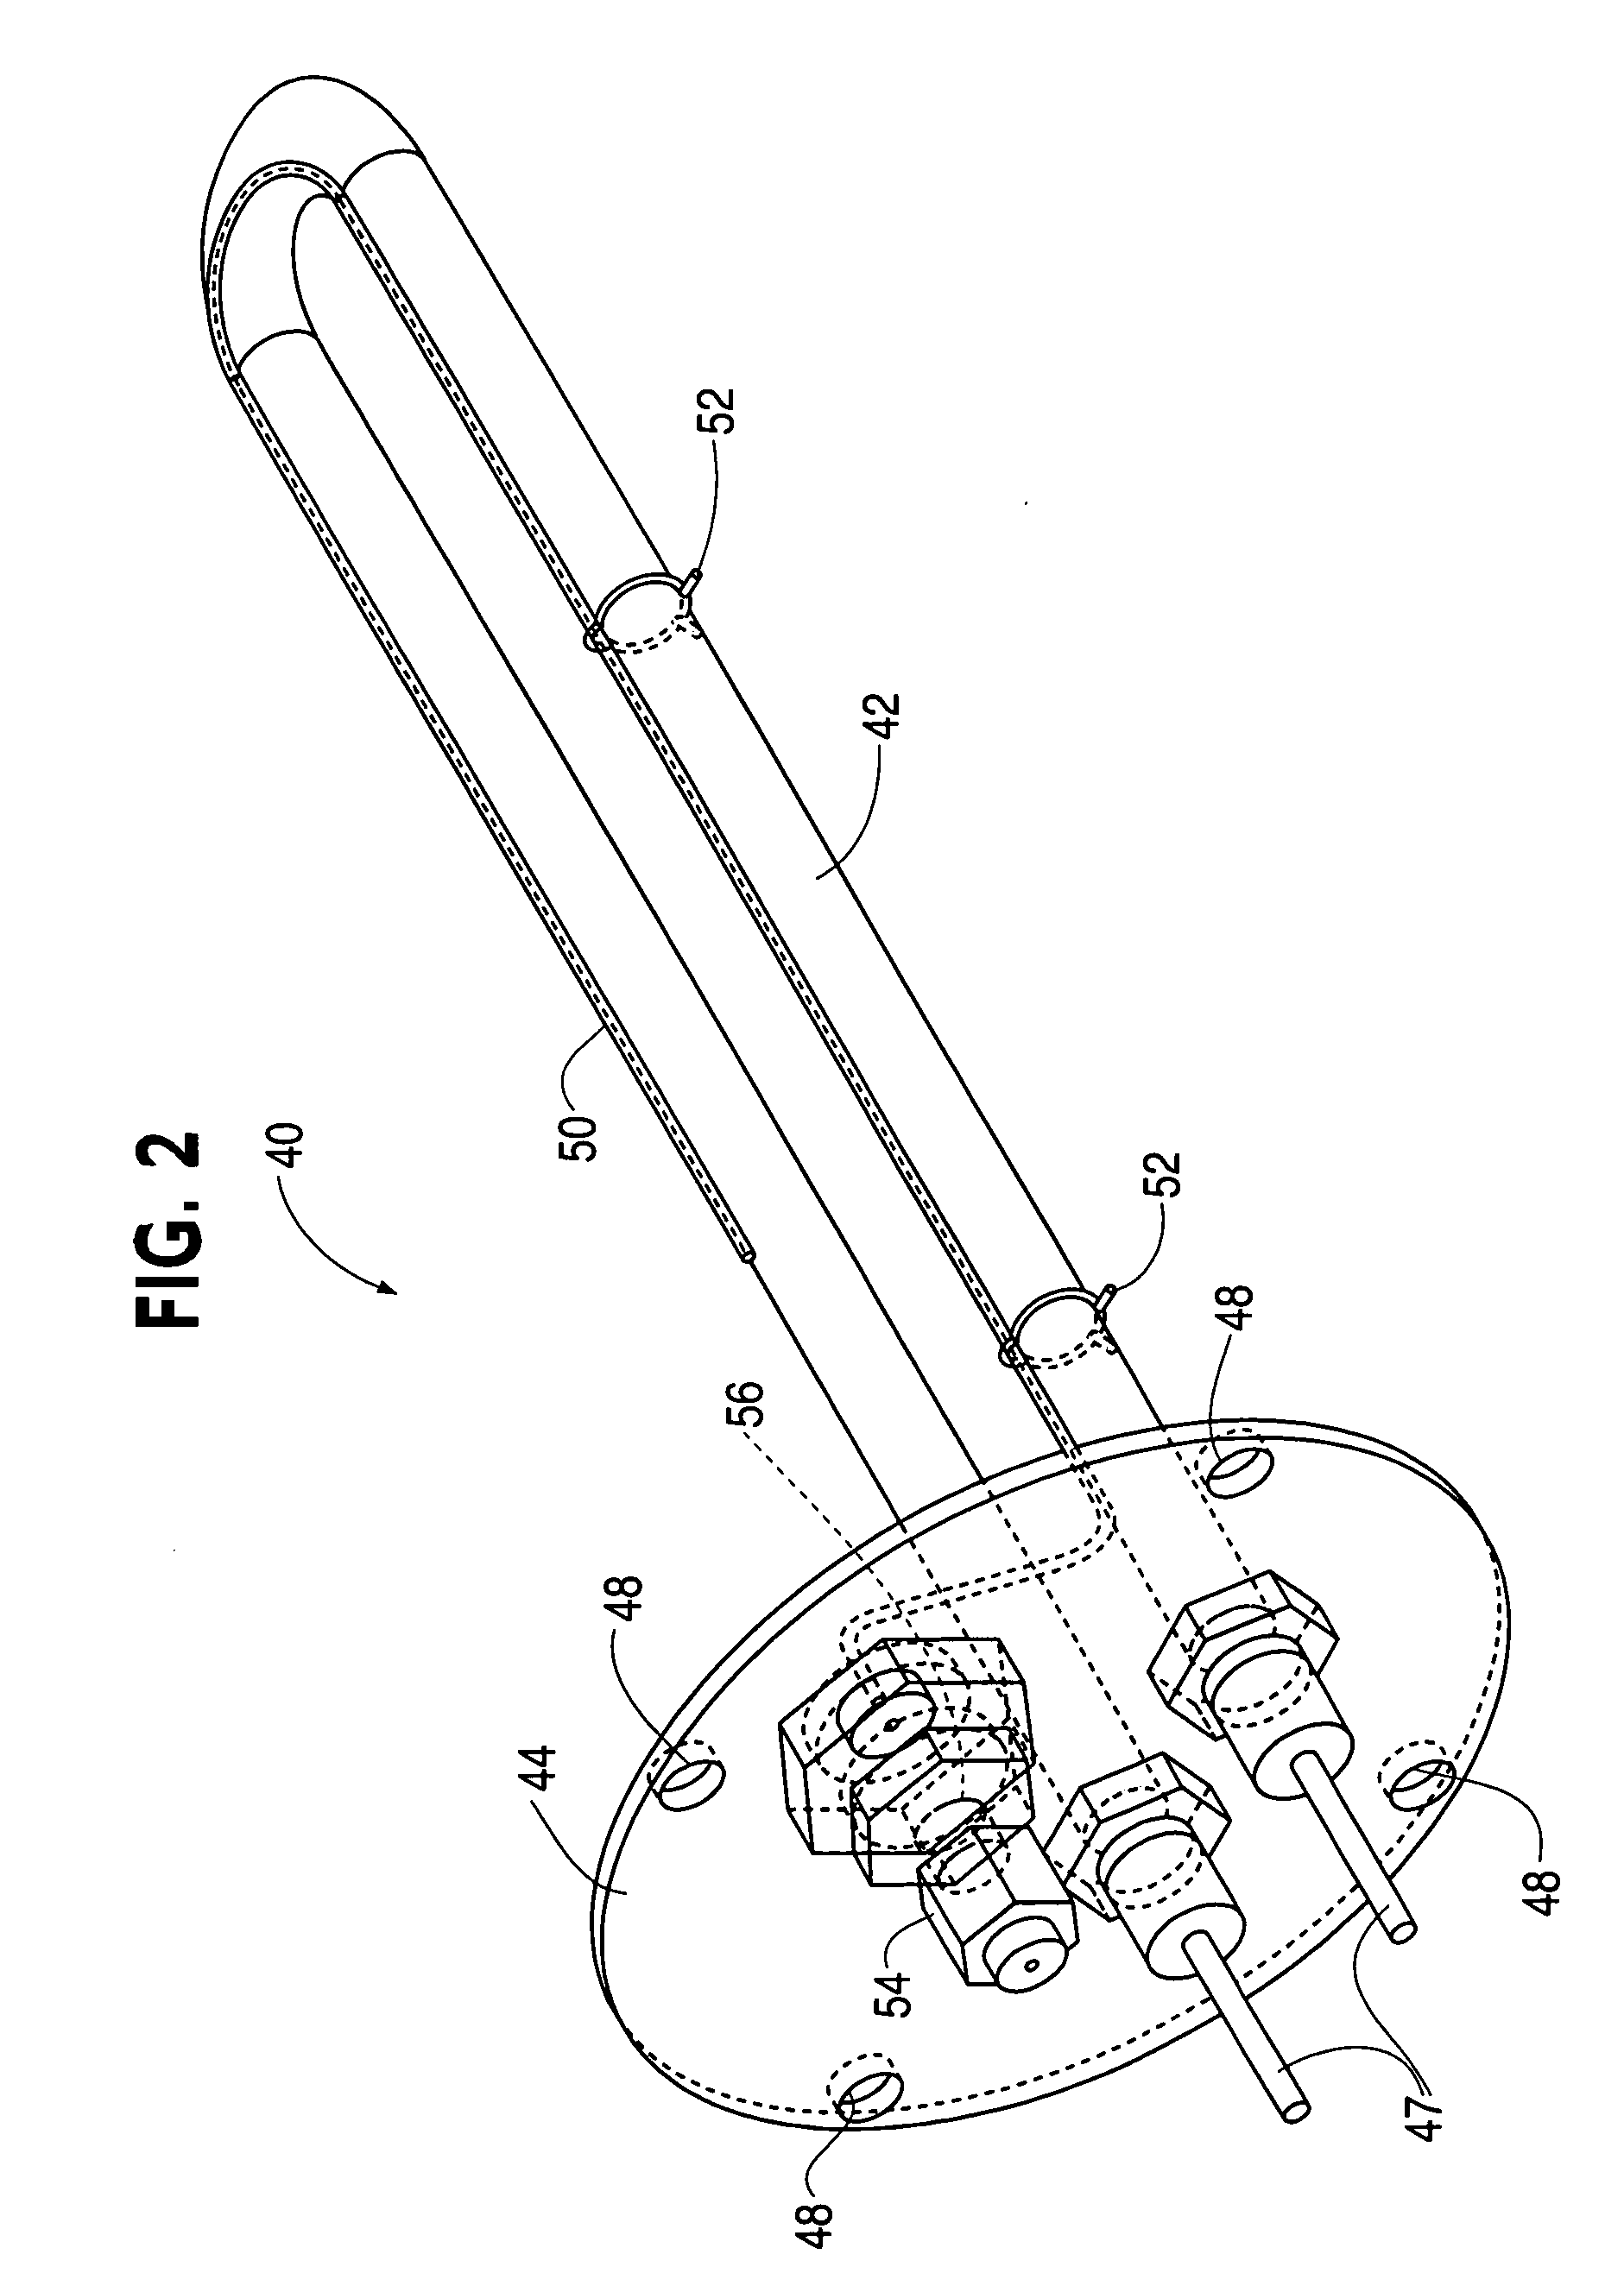 Steam generating method and apparatus for simulation test chambers